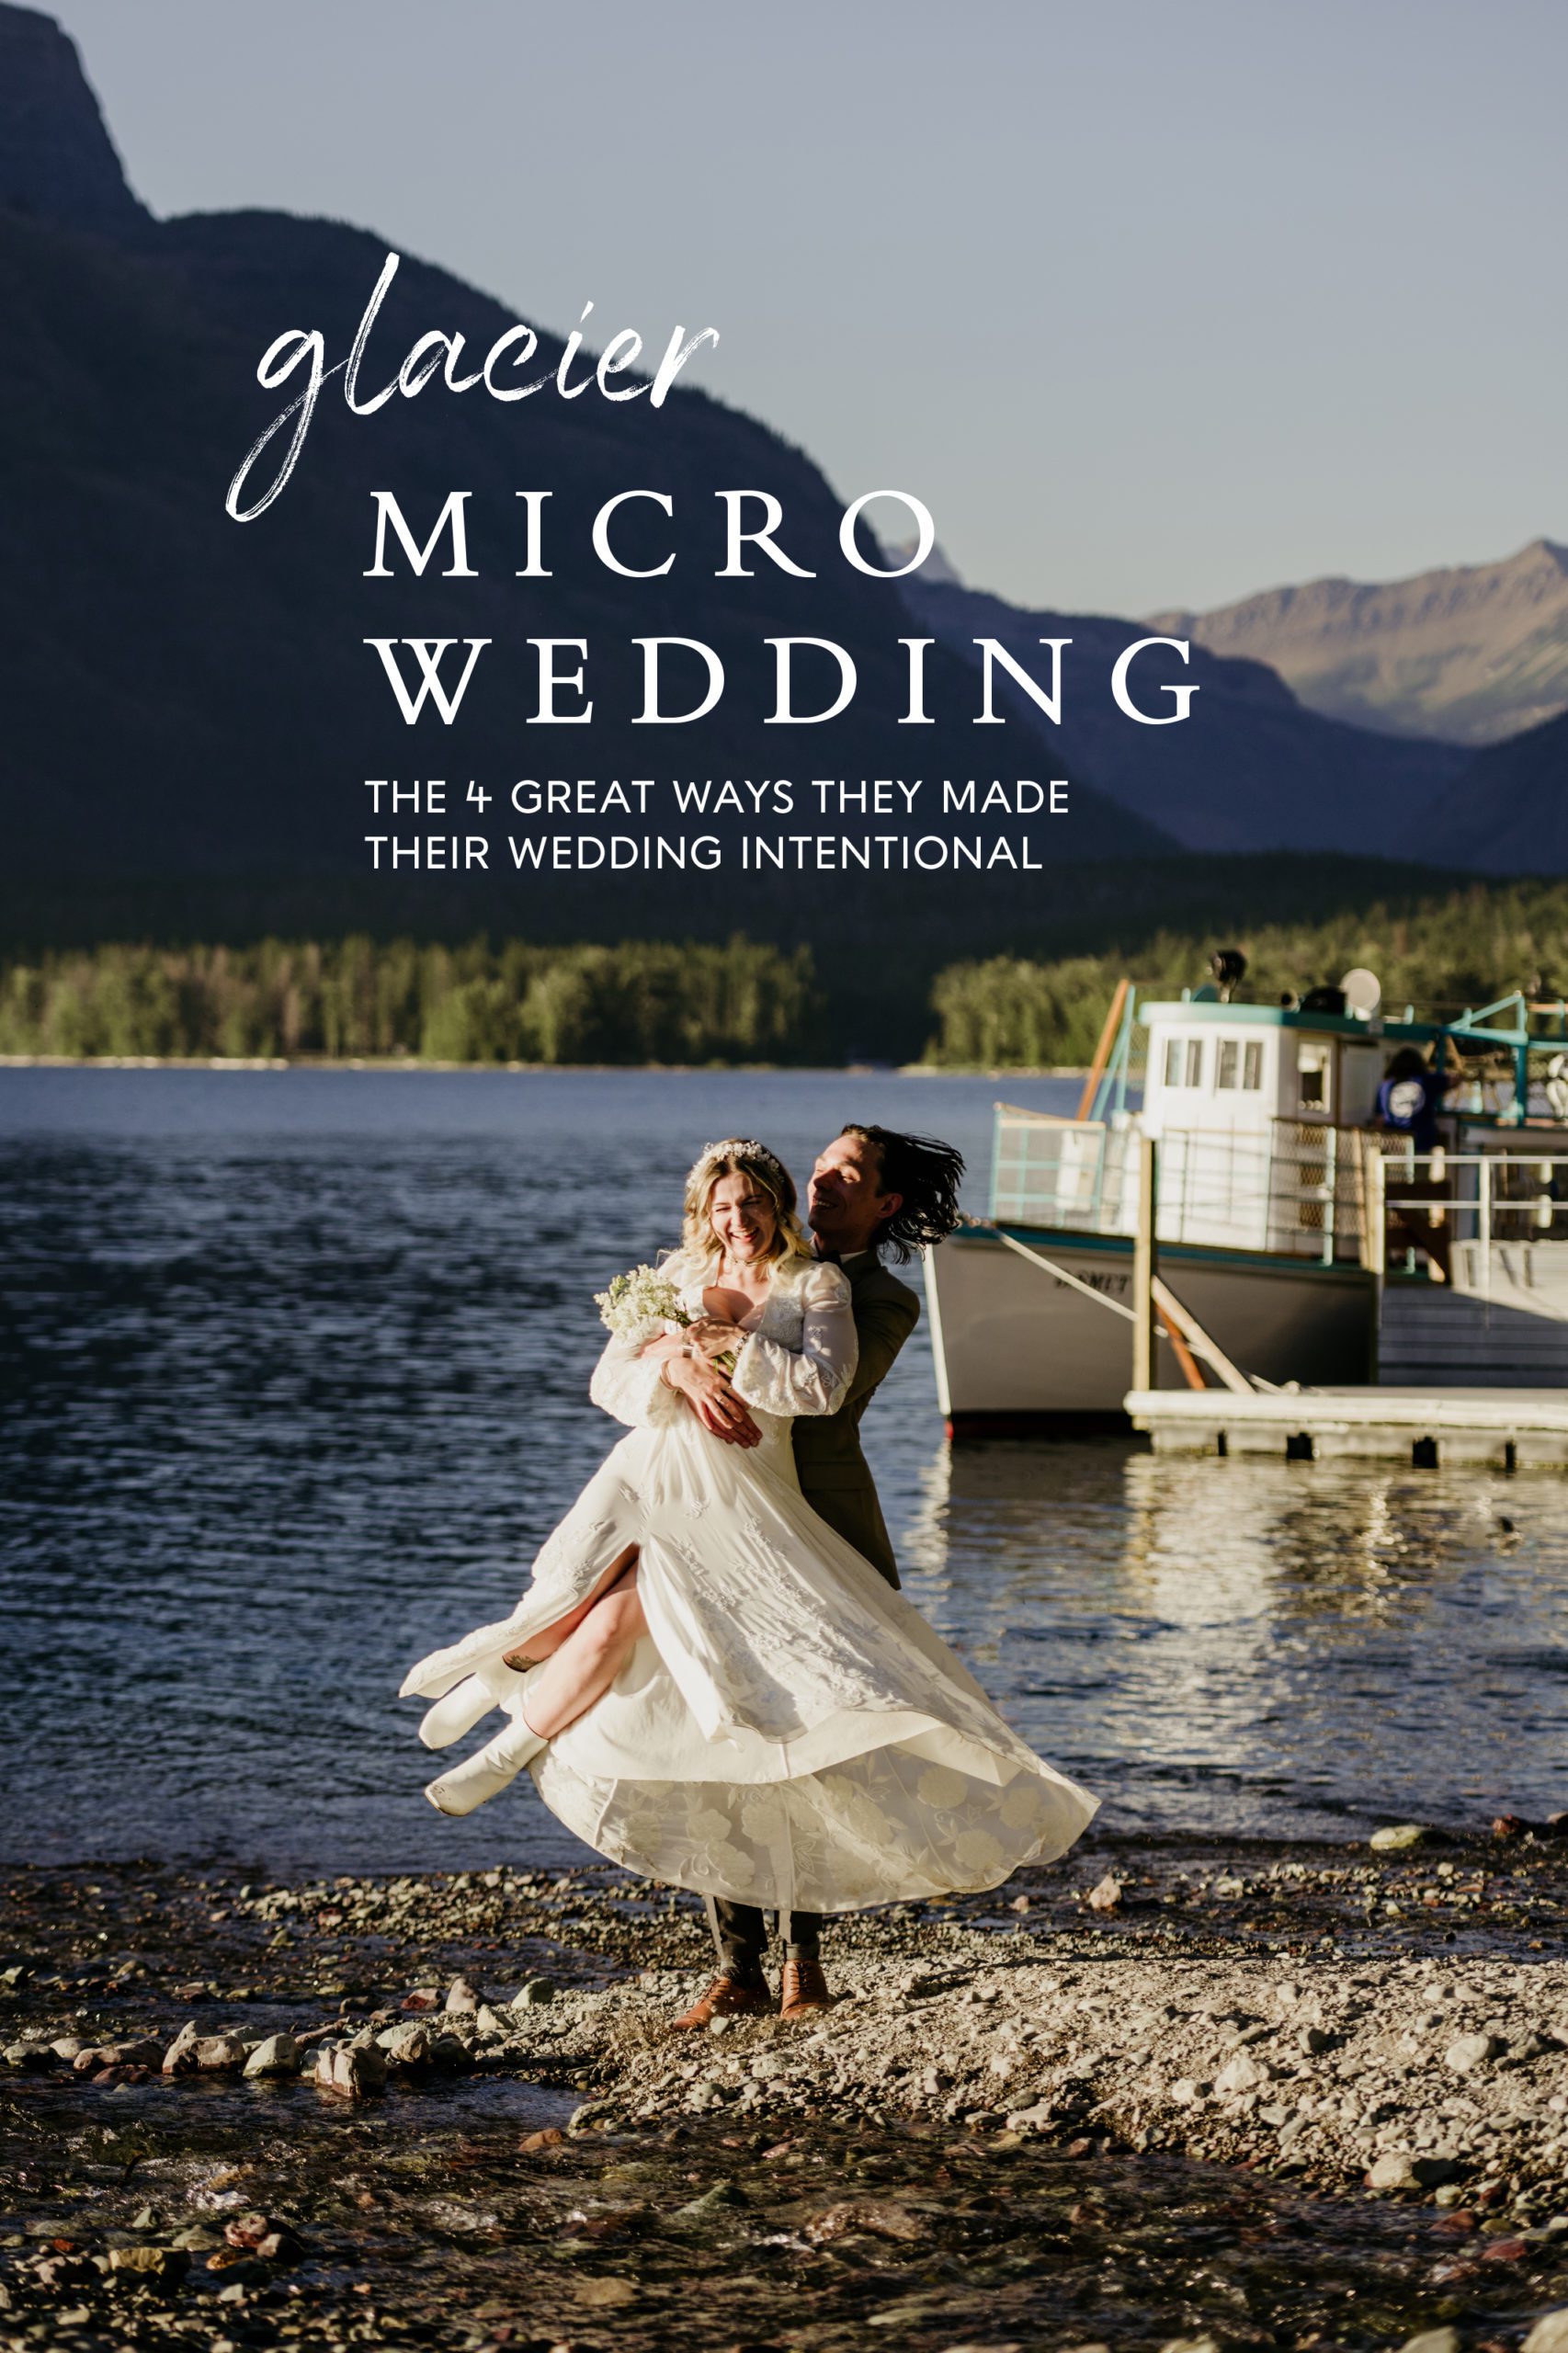 Glacier National Park micro wedding. 4 ways to make your micro wedding intentional. You can still have a wedding in glacier national park with guests. 